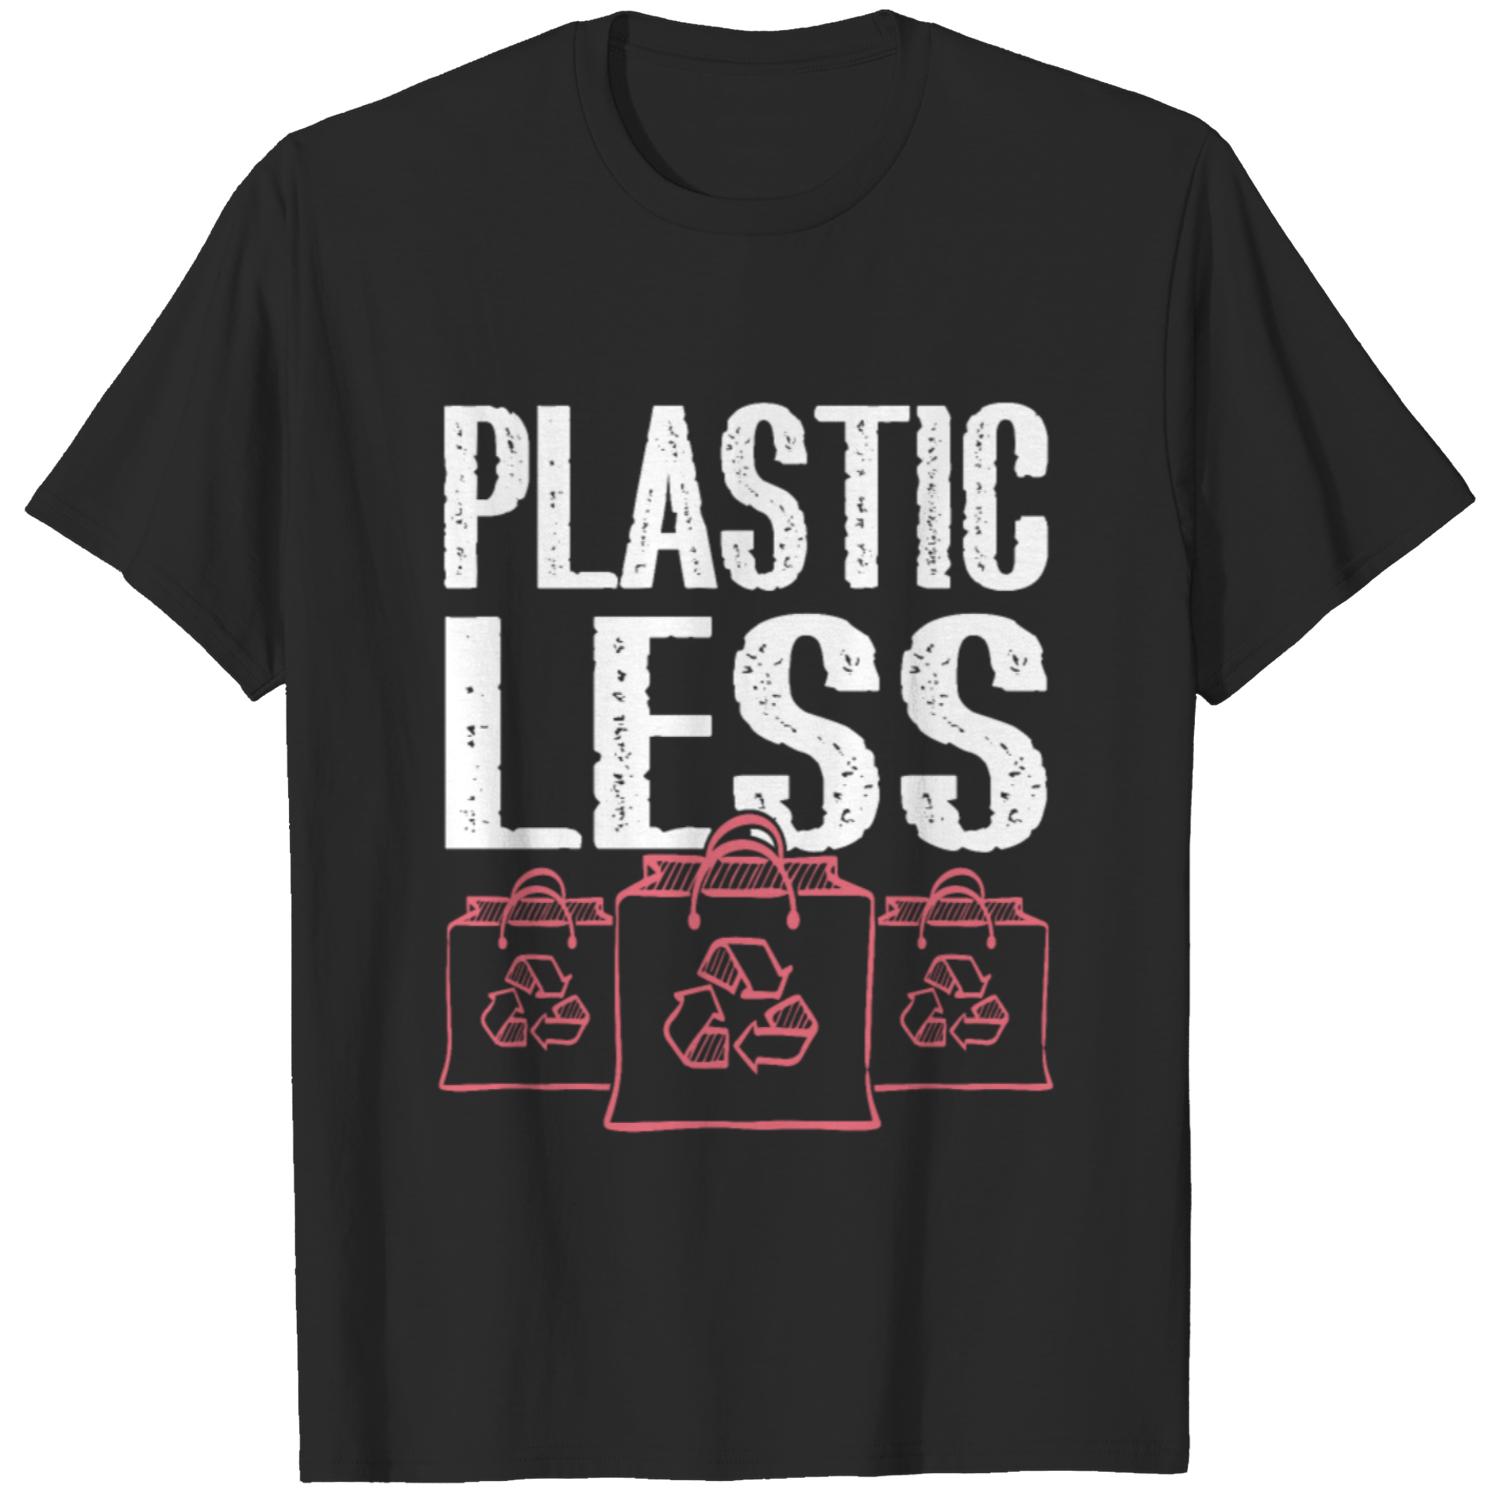 plastic recycle T-shirt